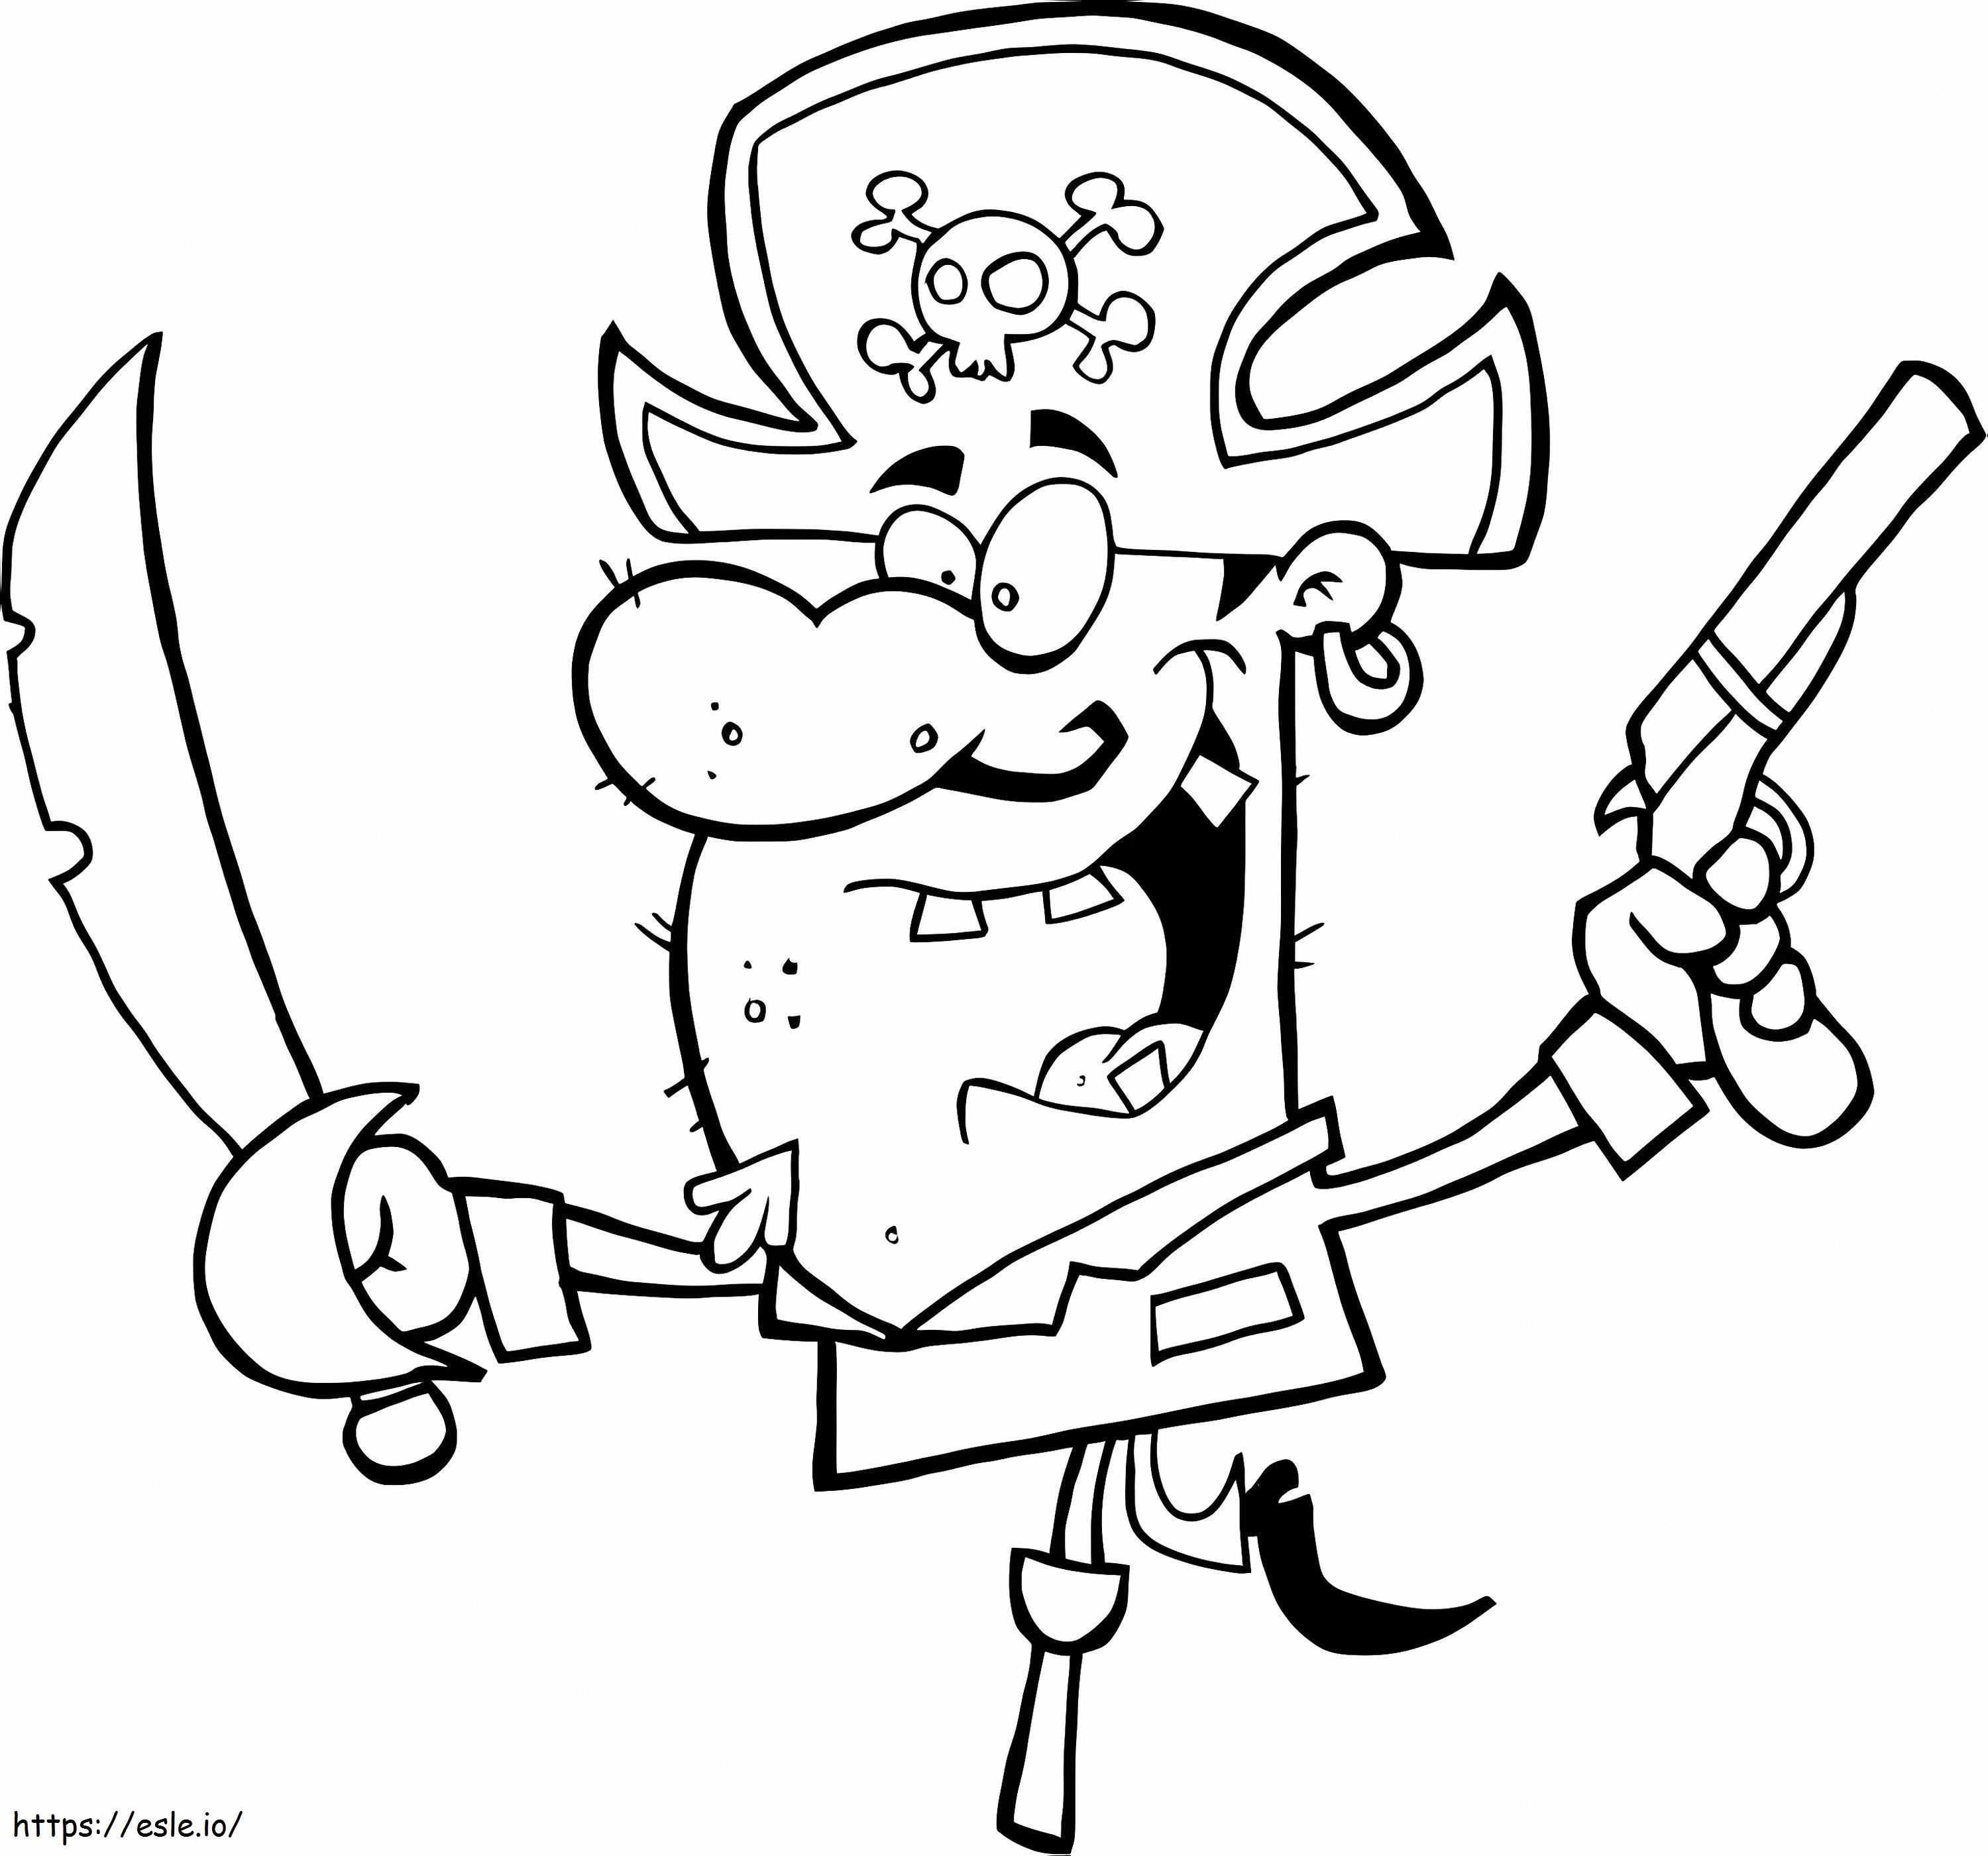 Pirate With A Sword And A Gun coloring page